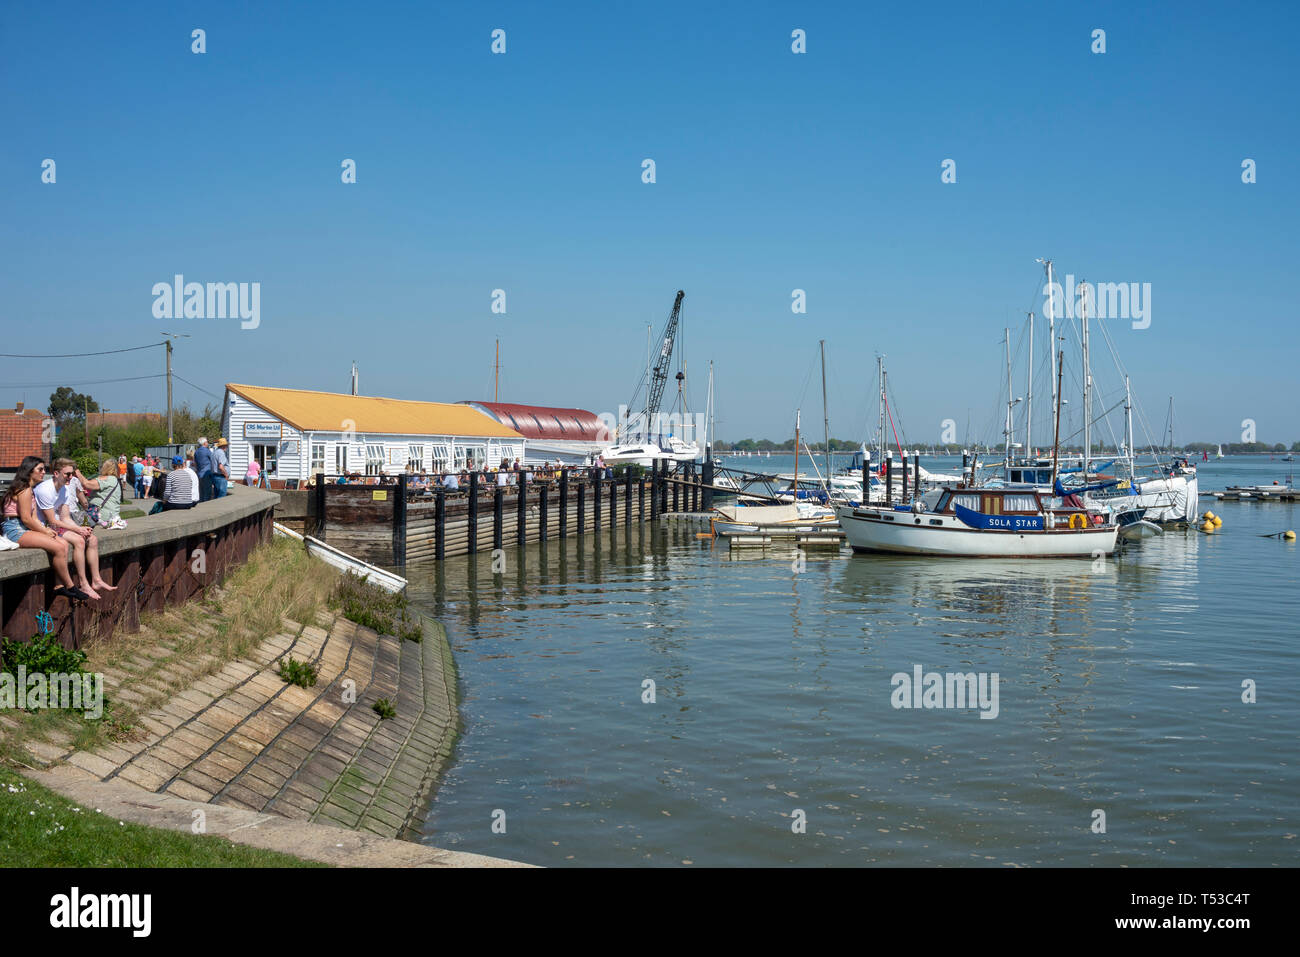 The Lock Tea room at Heybridge Basin, Essex, UK on a bright sunny day with people. River Blackwater with boats. People eating outside enjoying weather Stock Photo